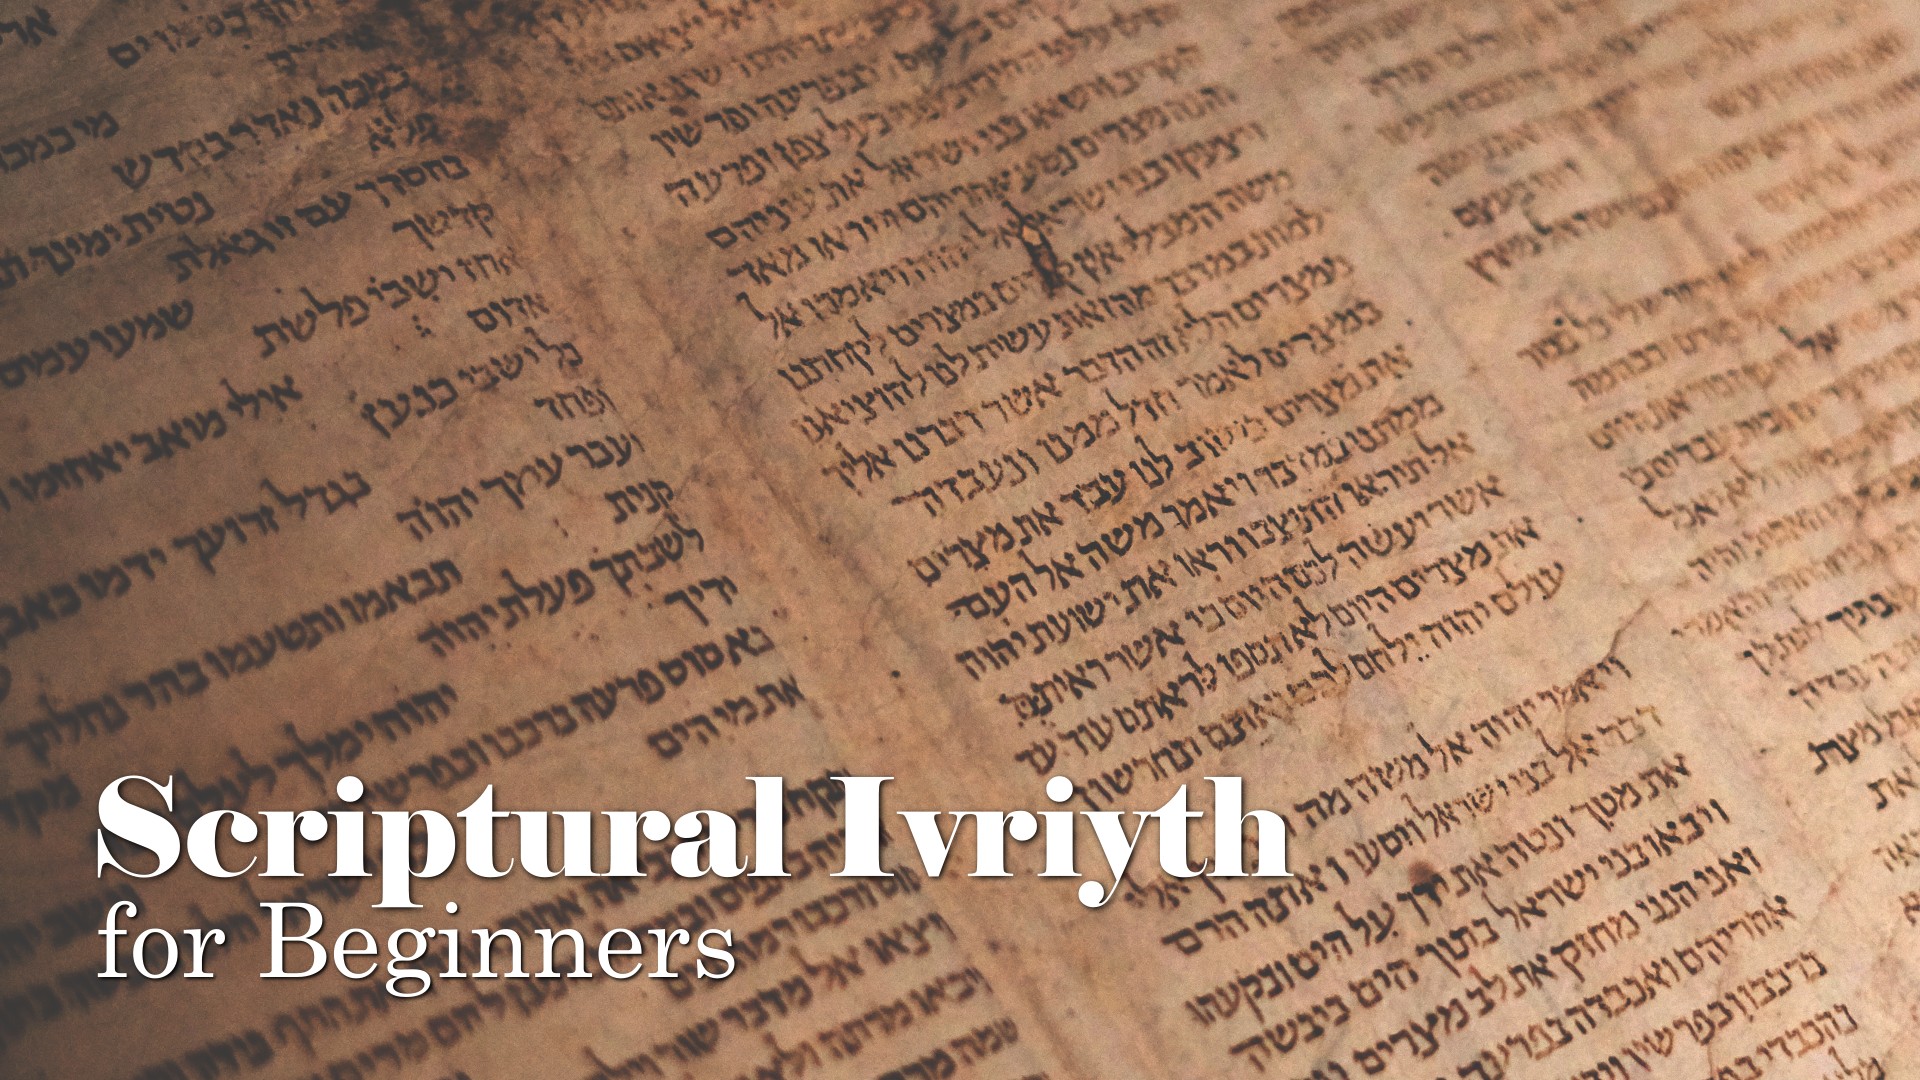 You are currently viewing Scriptural Ivriyth for Beginners